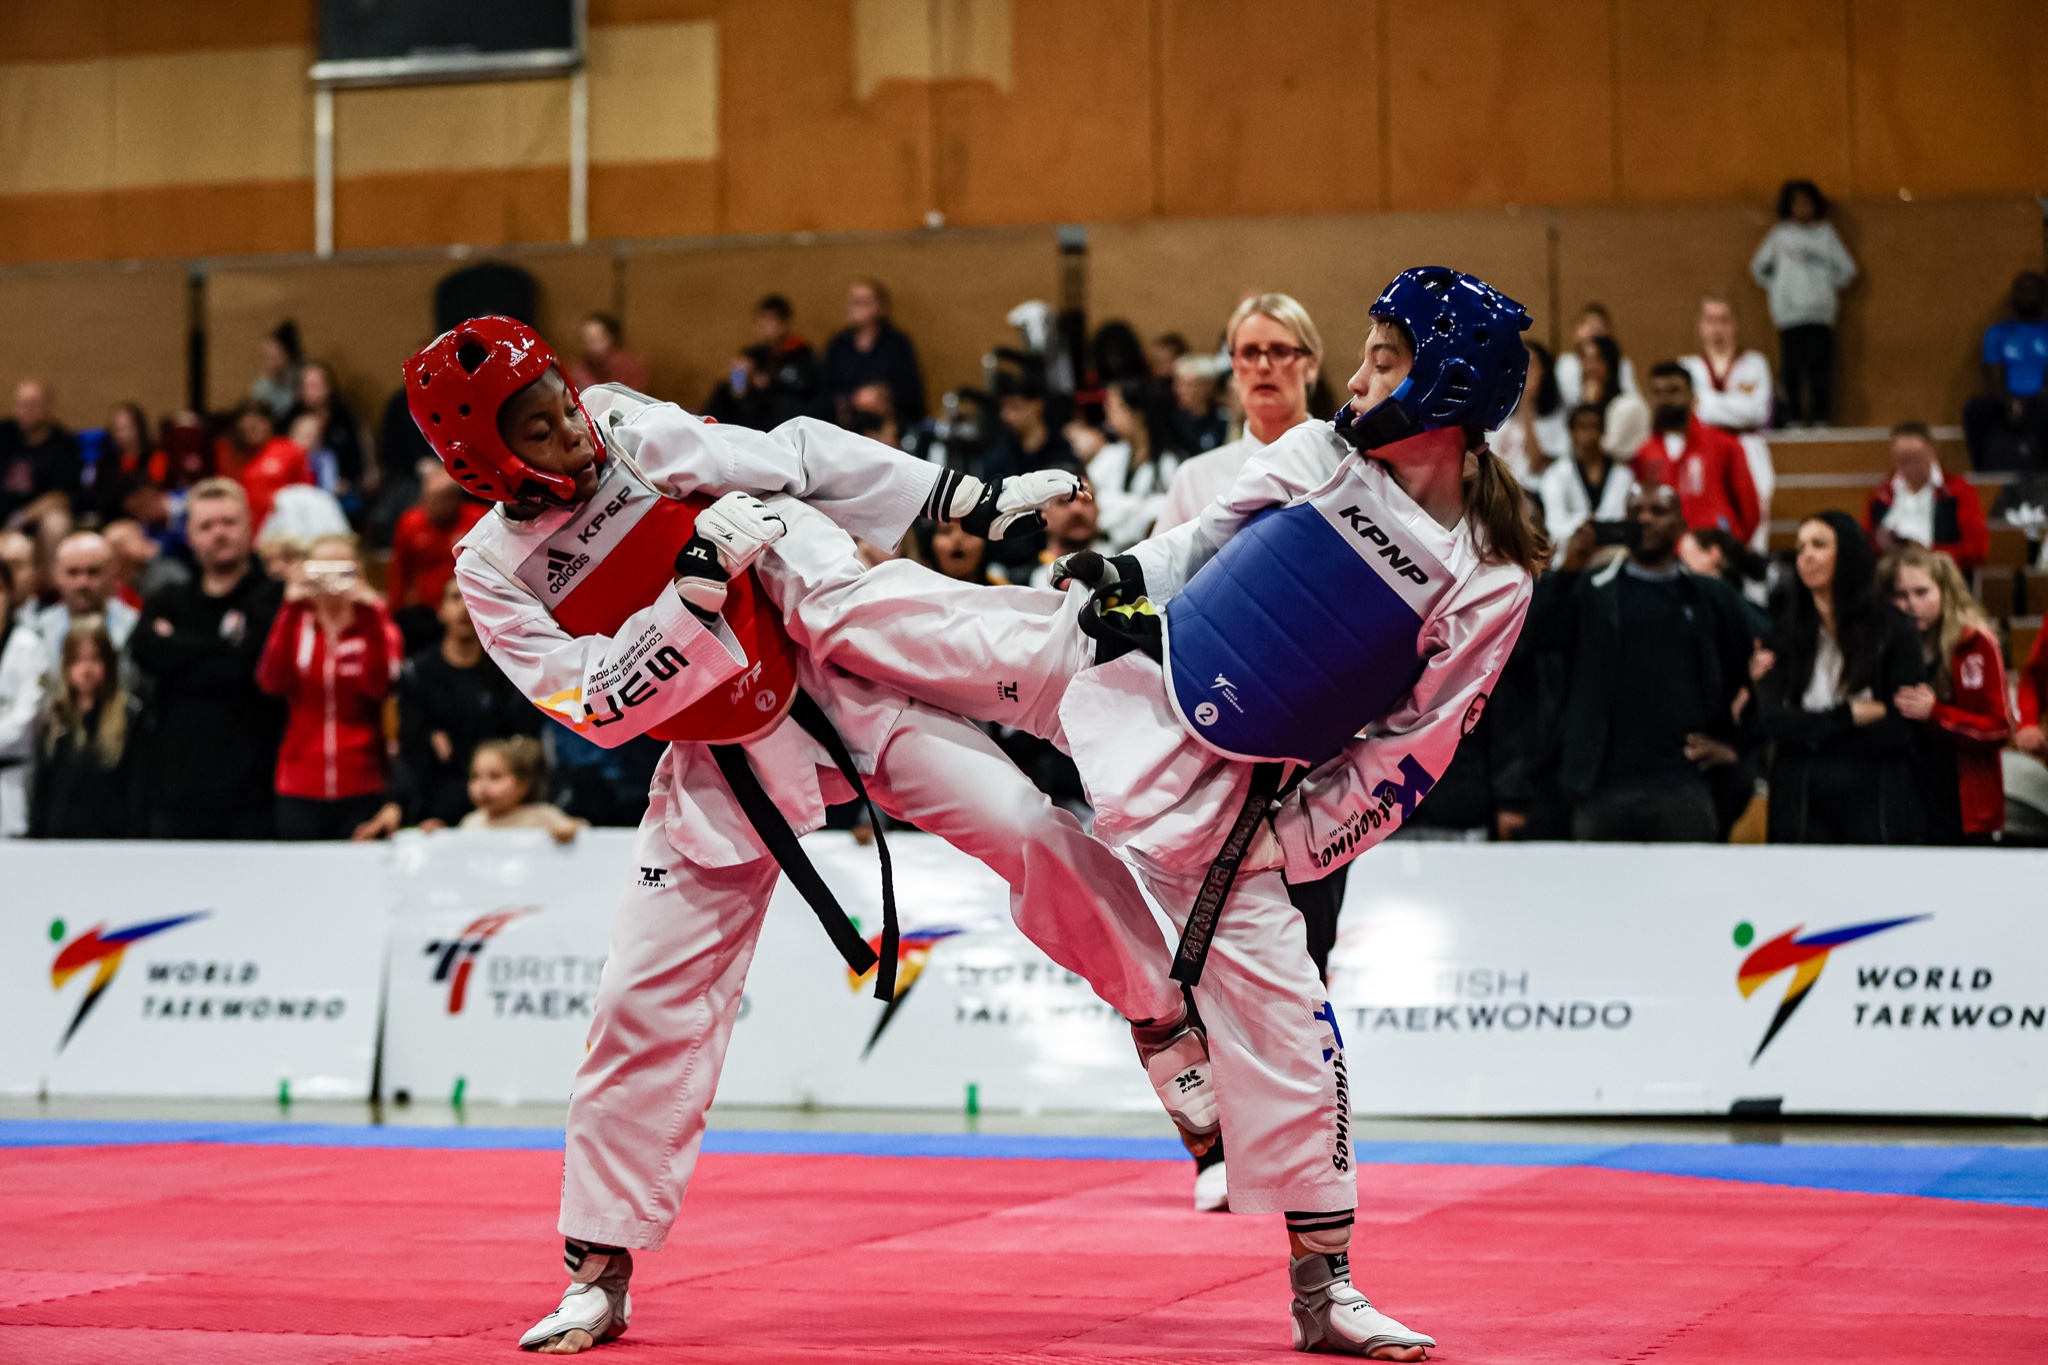 British Taekwondo's Sport Performance Department Selection Competition Series event at the George Carnell Leisure Centre in Davyhulme, Manchester. Photo courtesy of All Sports Photography © May 2022